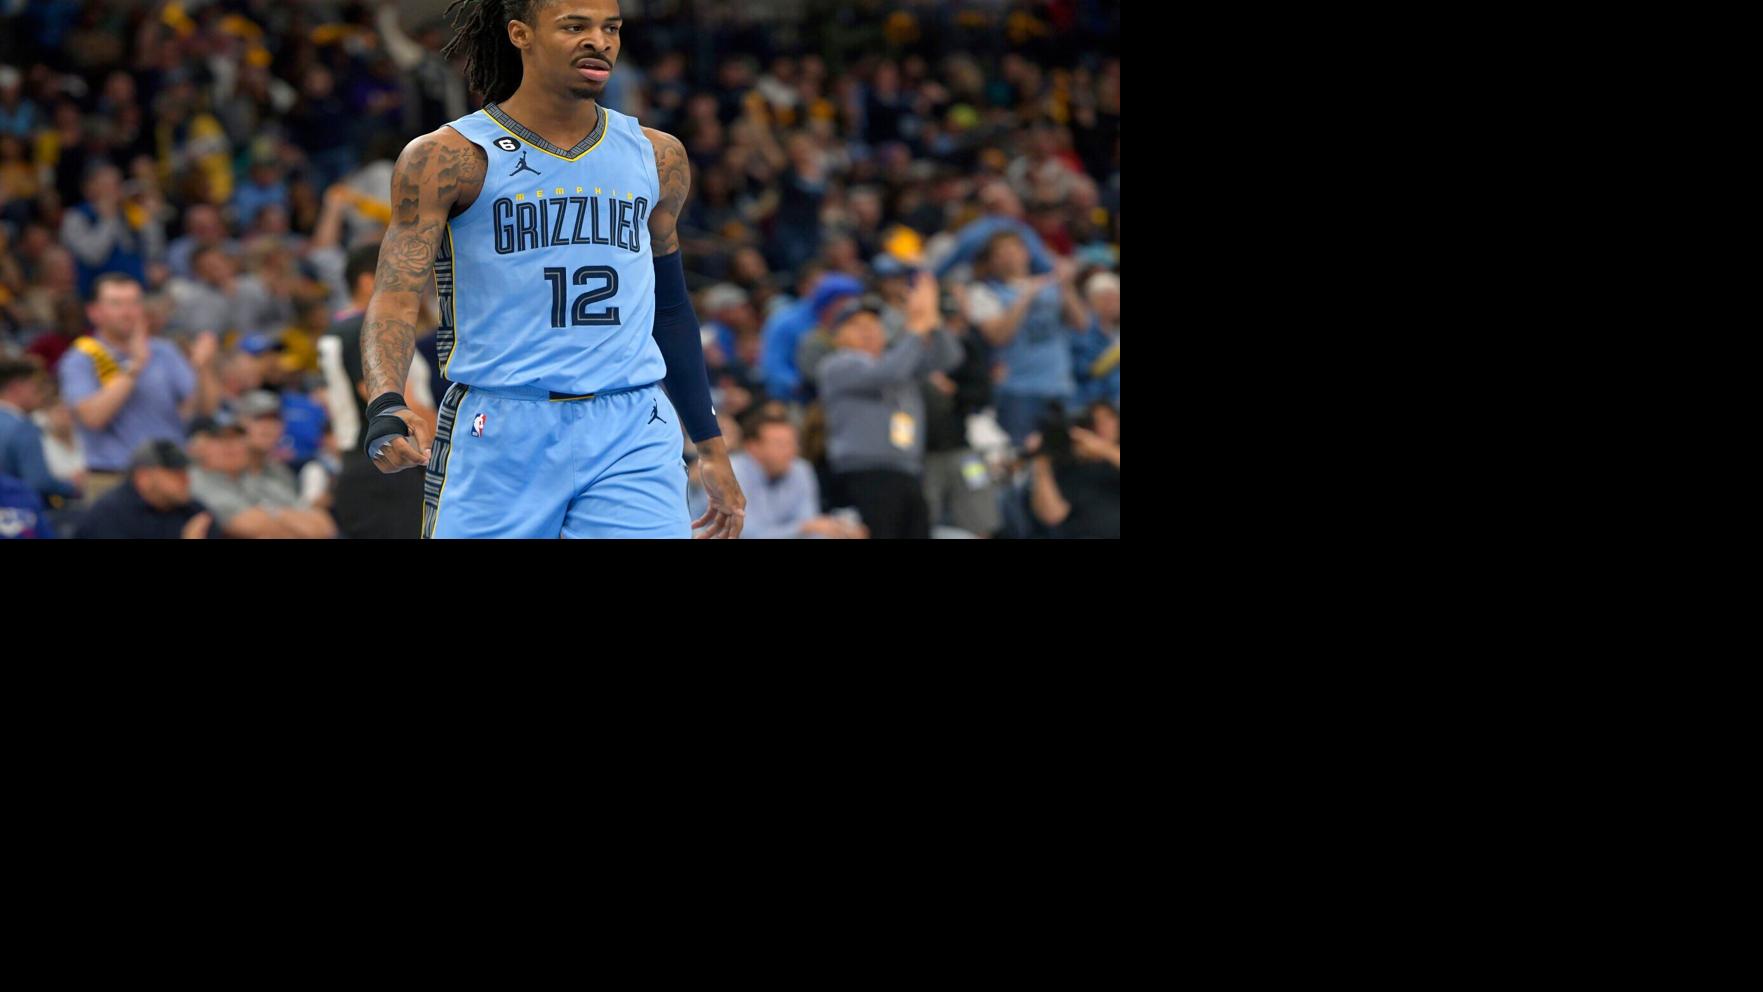 With Ja Morant suspended, so are Grizzlies’ plans for NBA title chase